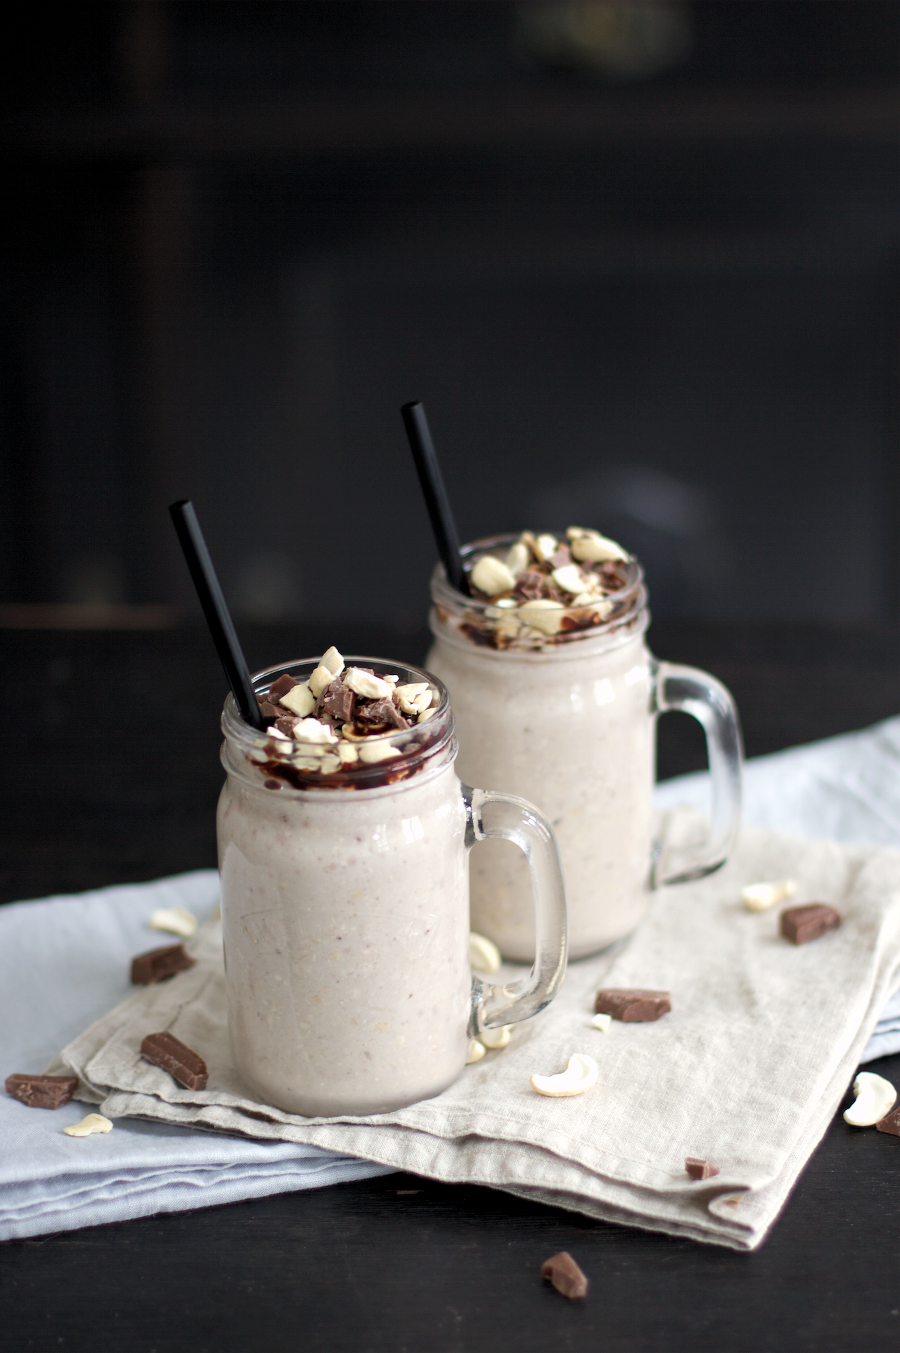 The Dashing Rider Cashew Soy Oatmeal Smoothie